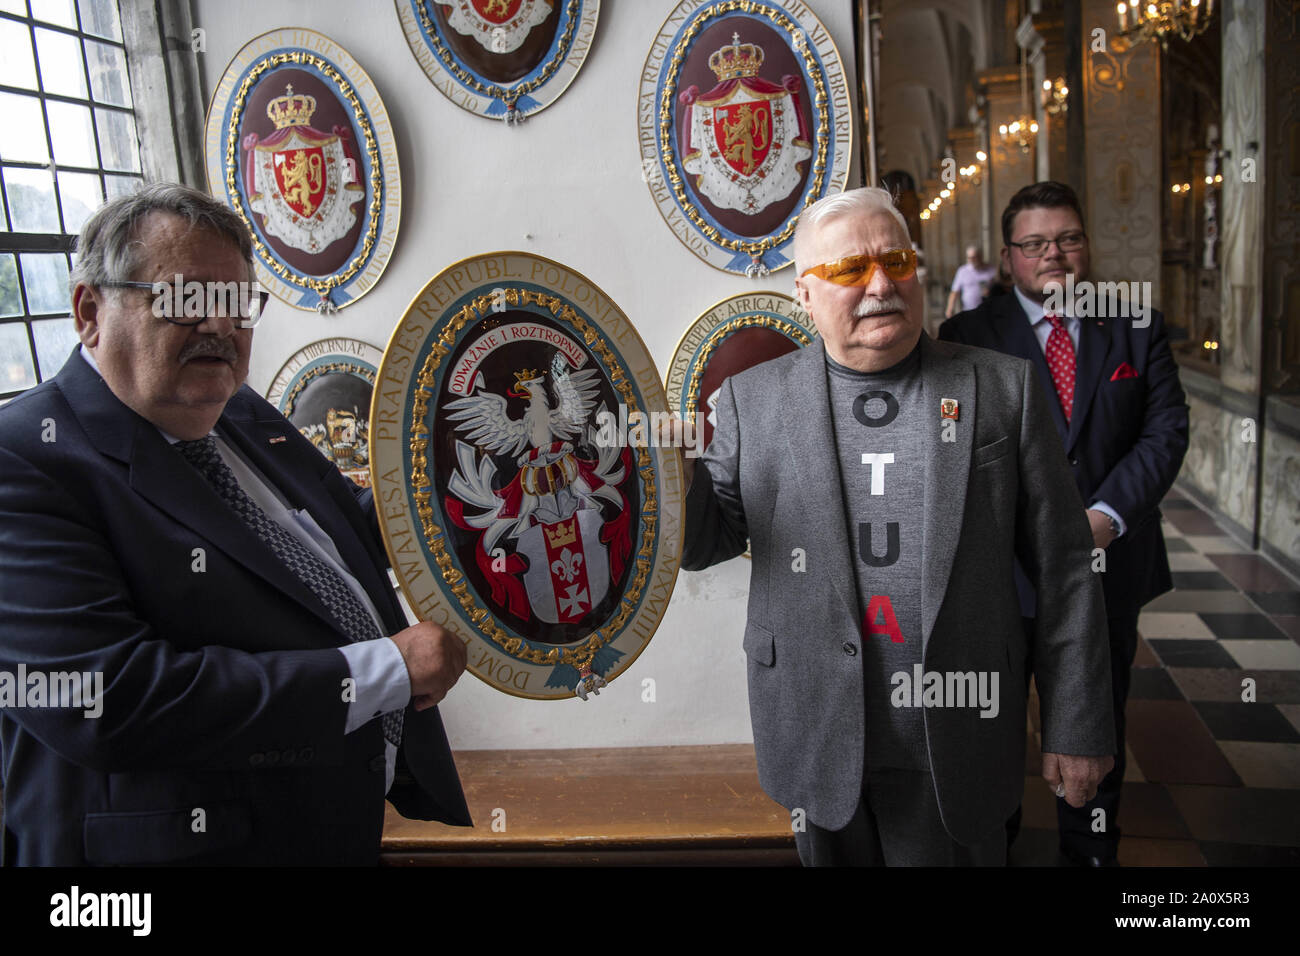 September 8, 2019, KÃ¸Benhavn, Danmark: Lech Walesa, former President in Poland and founder og the free Polish union SolidarnoÅ›Ä‡ arrives at Frederiksborg Castle where his family coat of arms is presentet and placed in the castle church. The family coat of arms is made for all recipients og the Danish Order of the Elephant that he received in 1993. The presentation is made by Rolf Christensen..Foto: Lars Moeller (Credit Image: © Lars Moeller/ZUMA Wire) Stock Photo